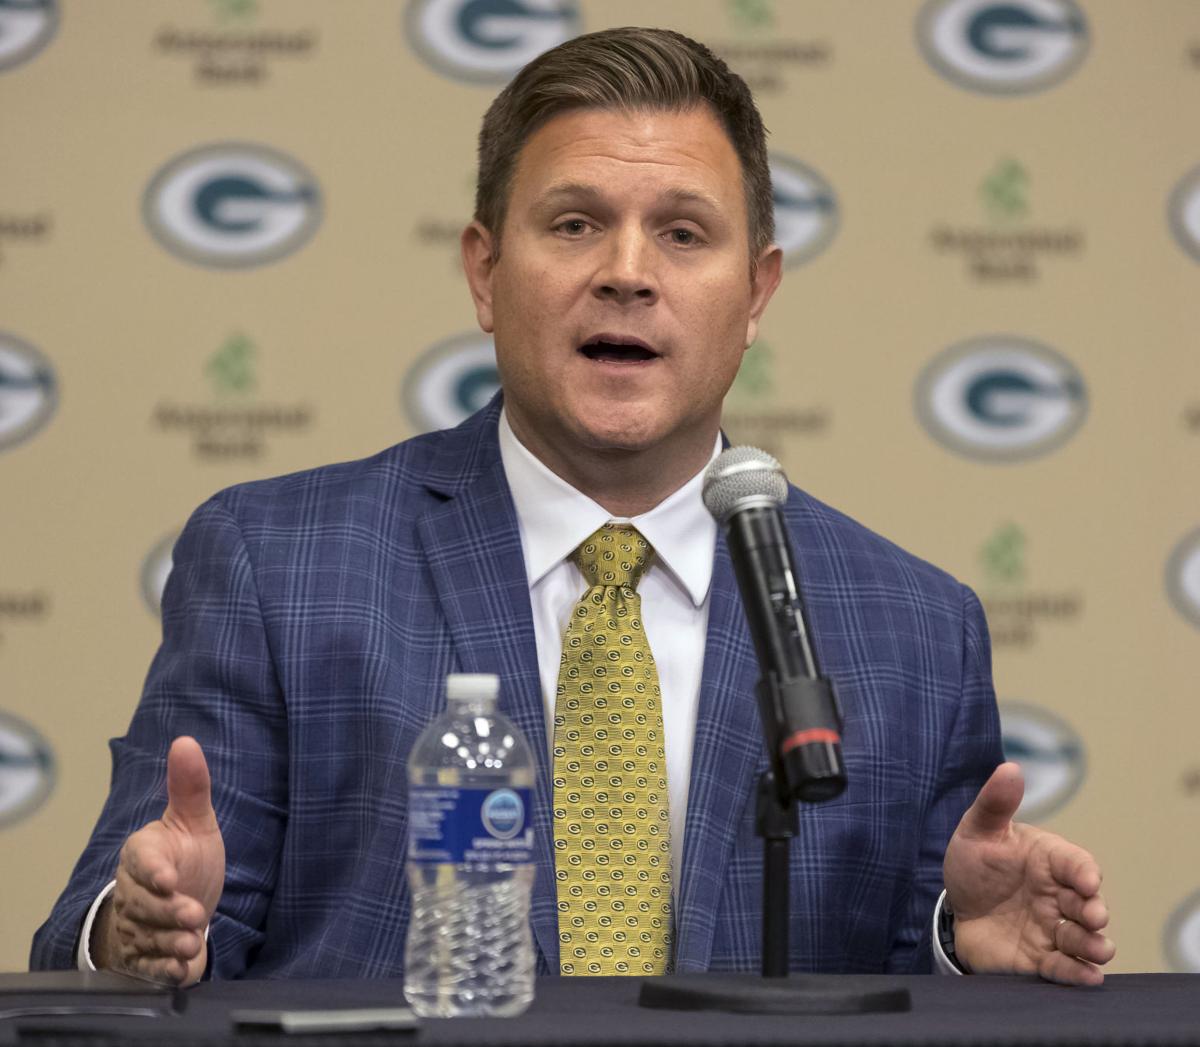 Packers: After landing &#39;dream job&#39; as GM, Brian Gutekunst indicates he&#39;ll be &#39;more aggressive&#39; in free agent pursuit | Pro football | madison.com